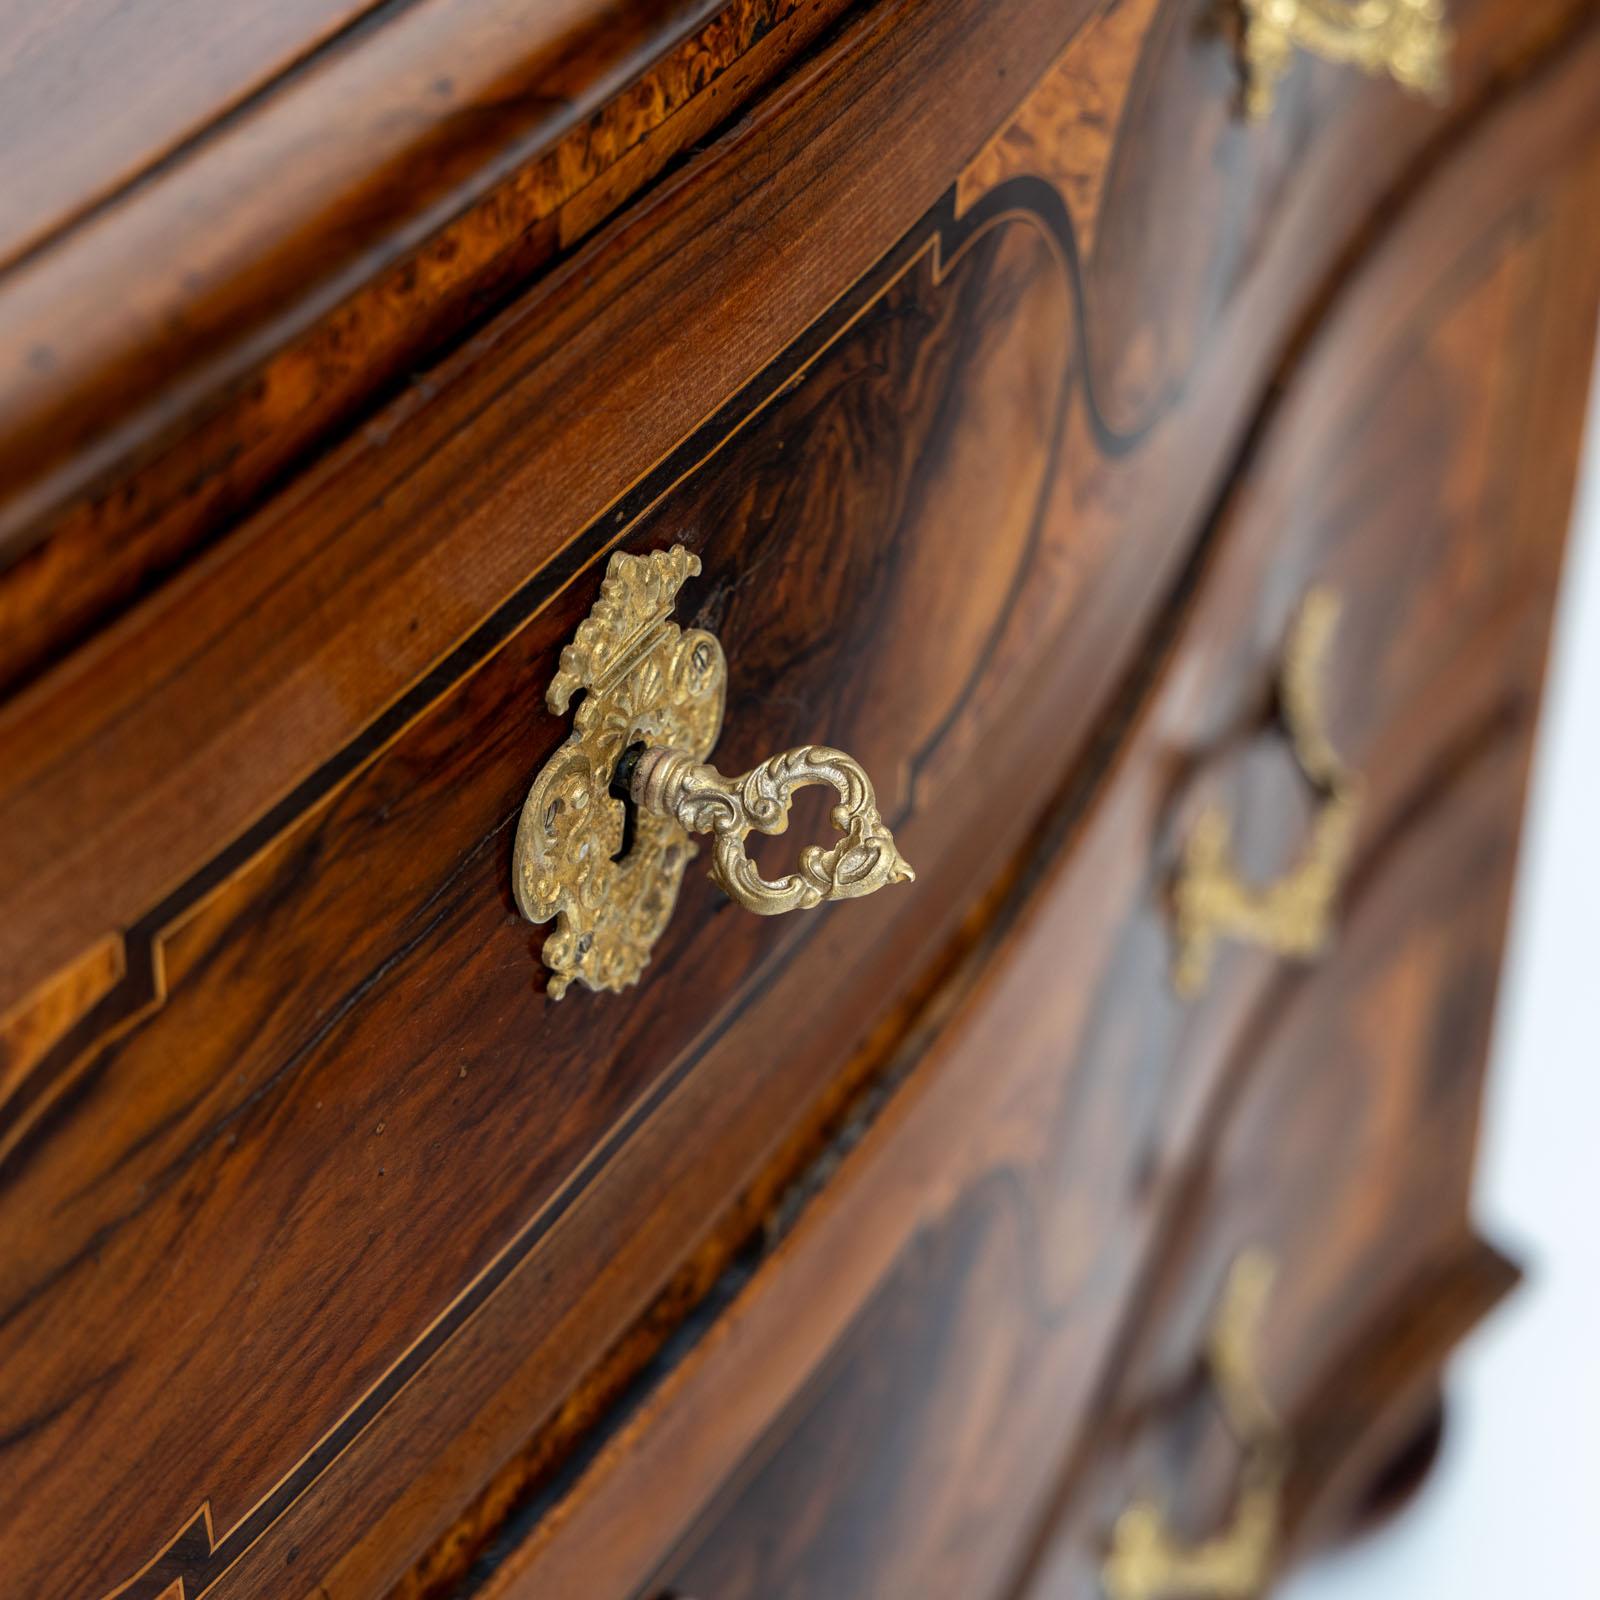 Baroque Chest of Drawers in Walnut, Inlaywork and Bronze fittings, Mid-18th C. For Sale 2